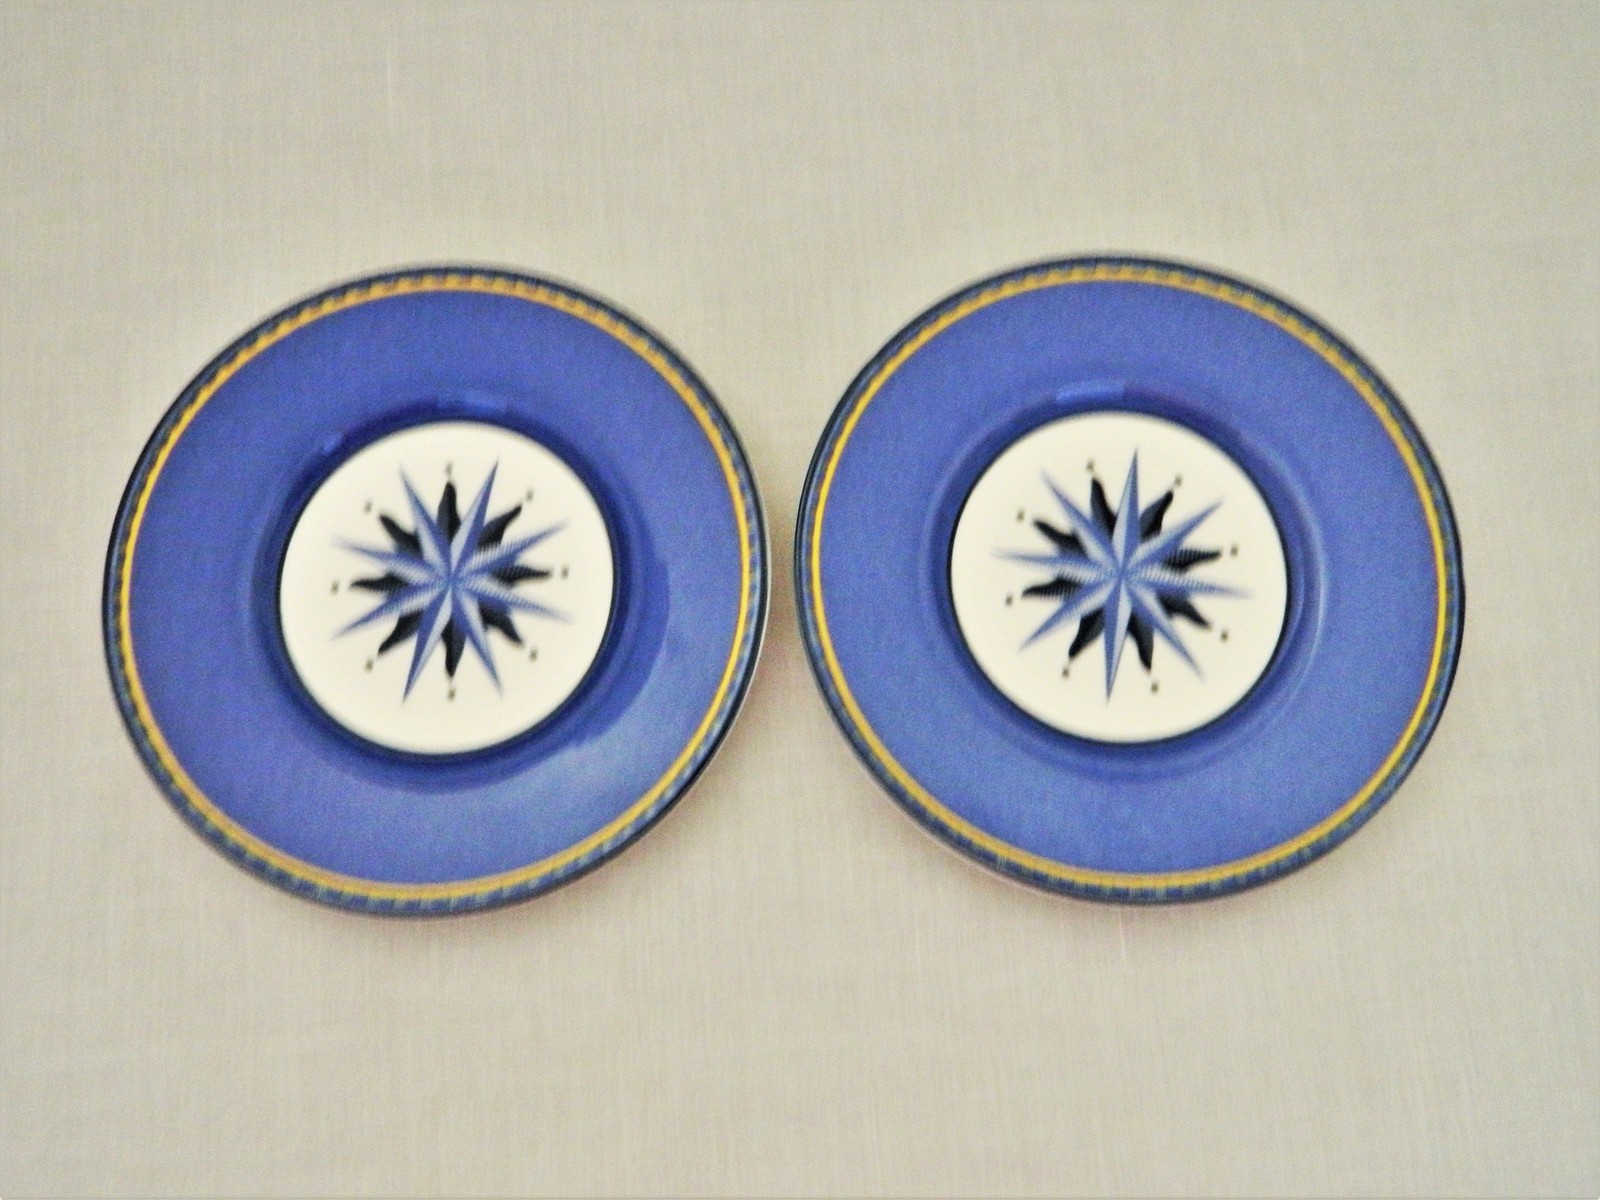 Casual Victoria Beale – 2 Cups And Saucers Set – Williamsburg 9026 ...